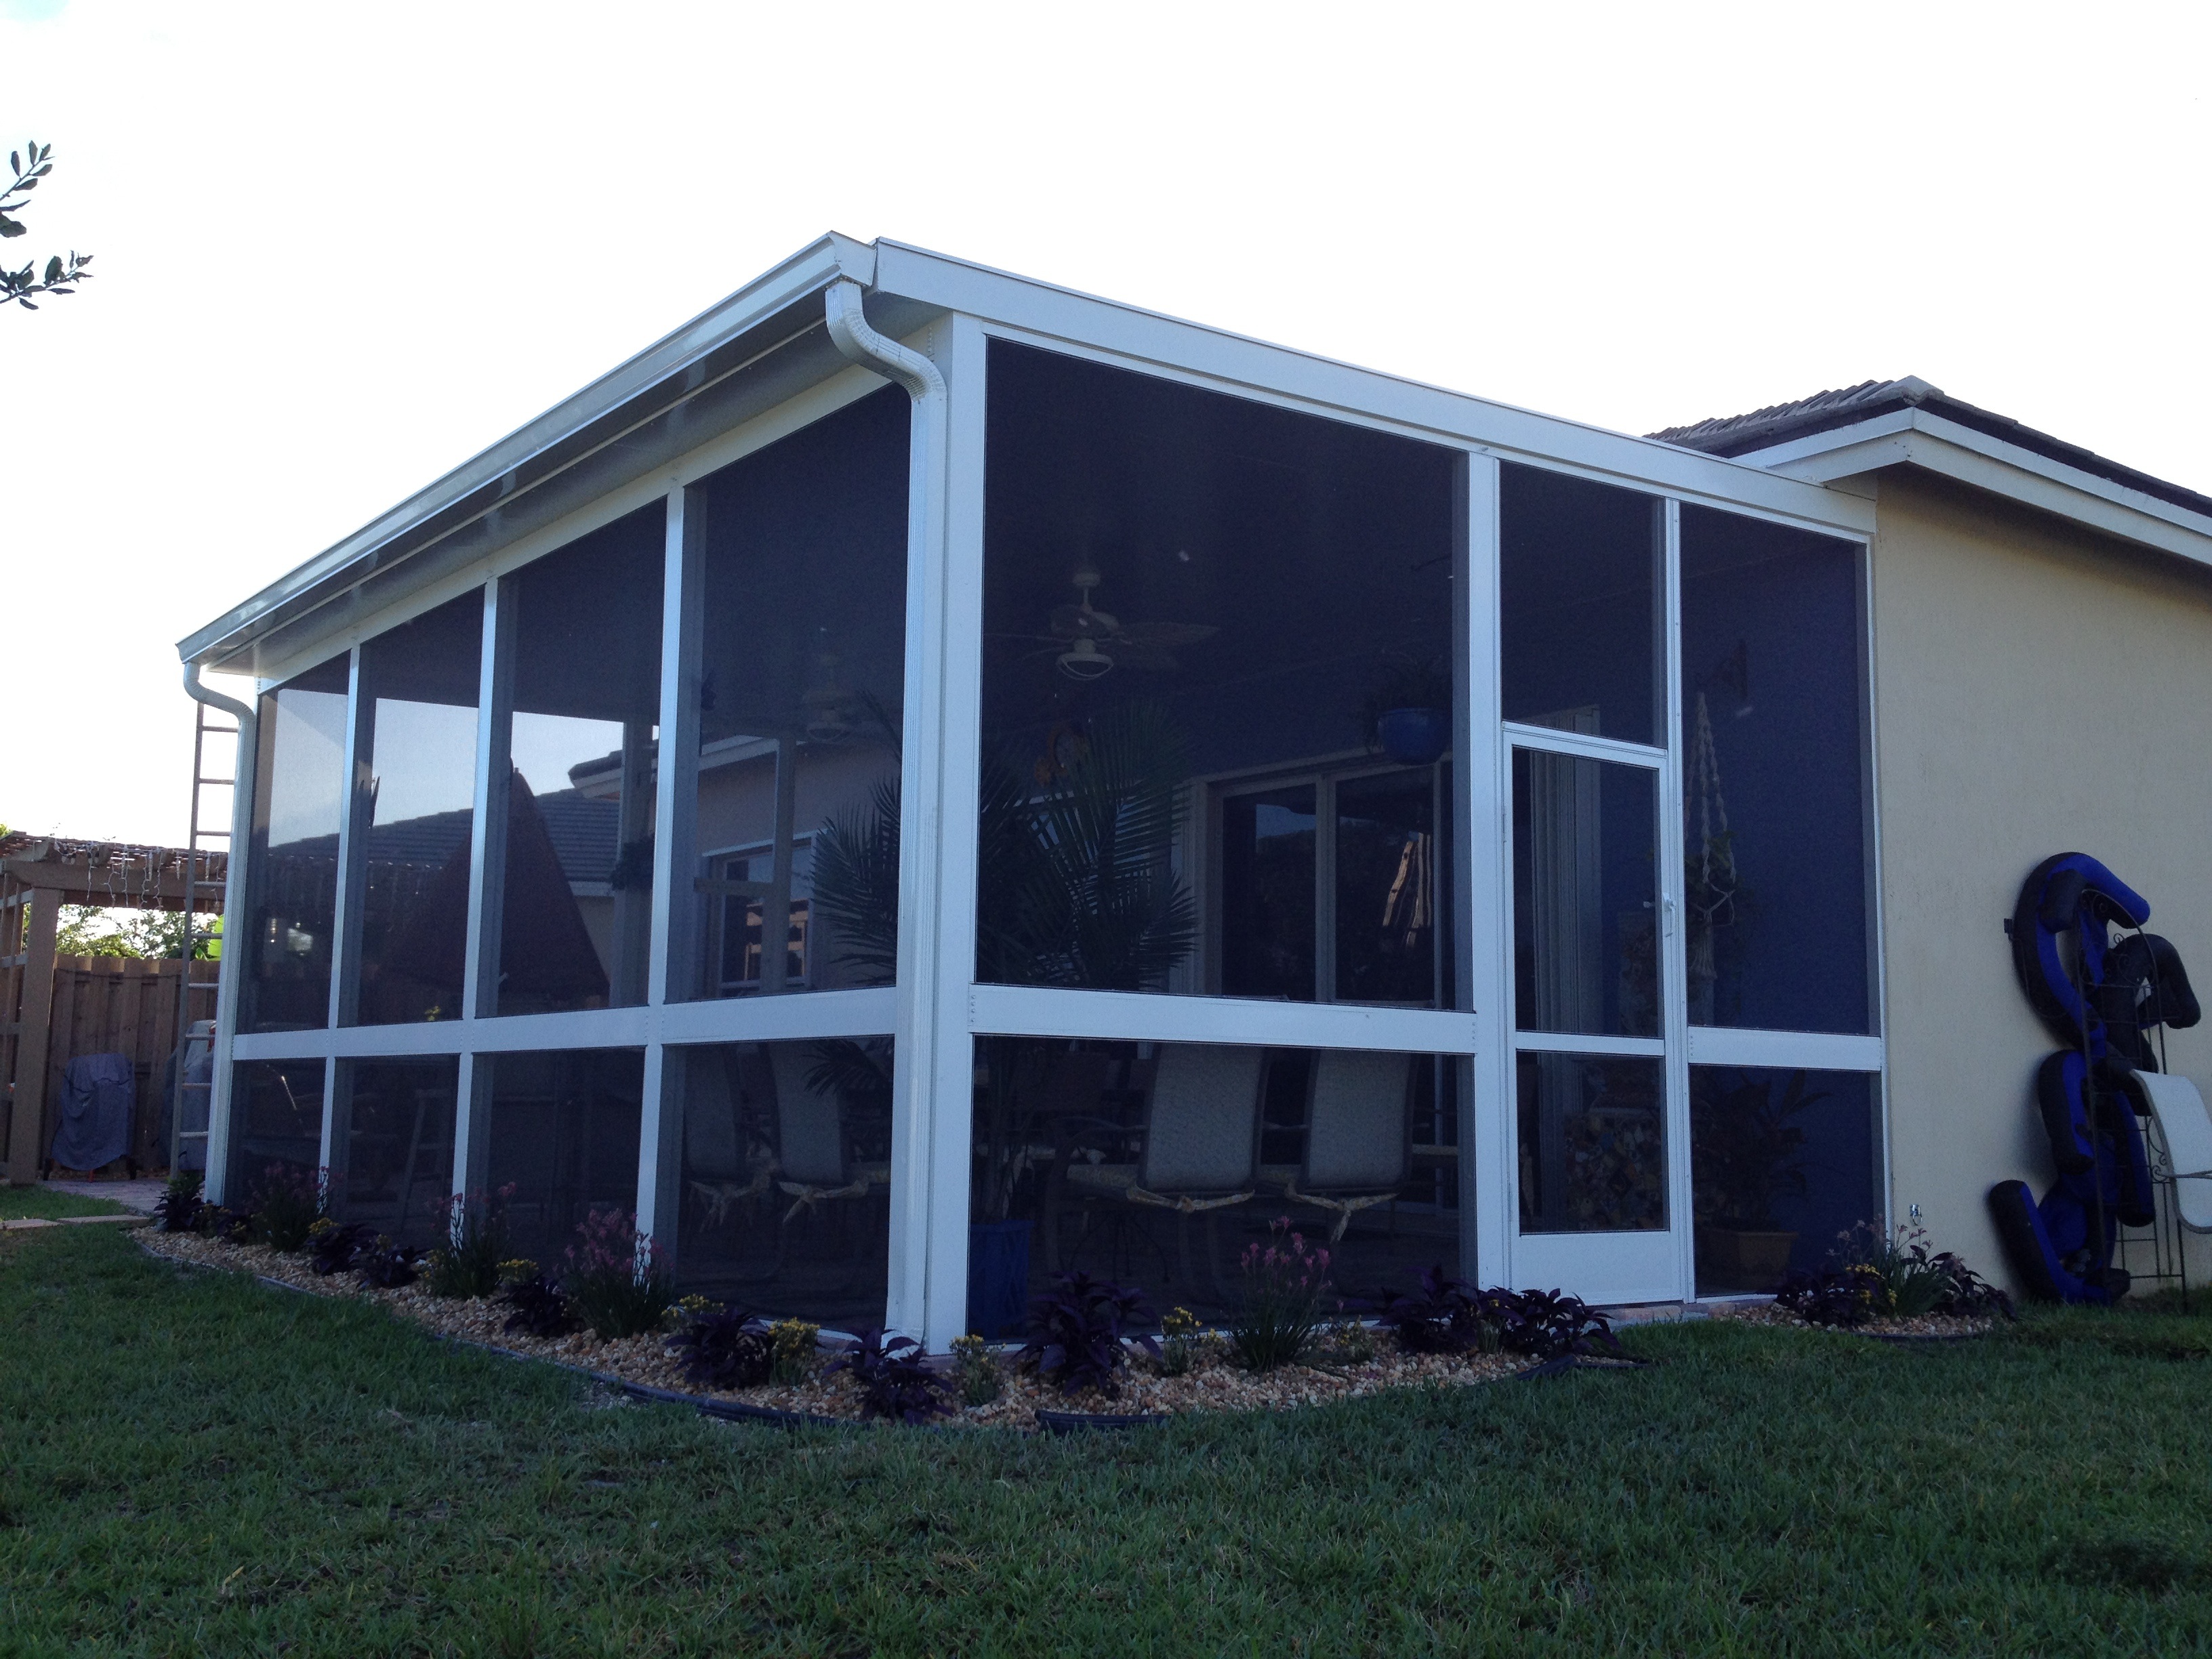 Venetian Builders, Inc., of Miami, Fla., designs screen patio enclosures such as this one to convert economically later to a glass-enclosed or insulated sunroom.